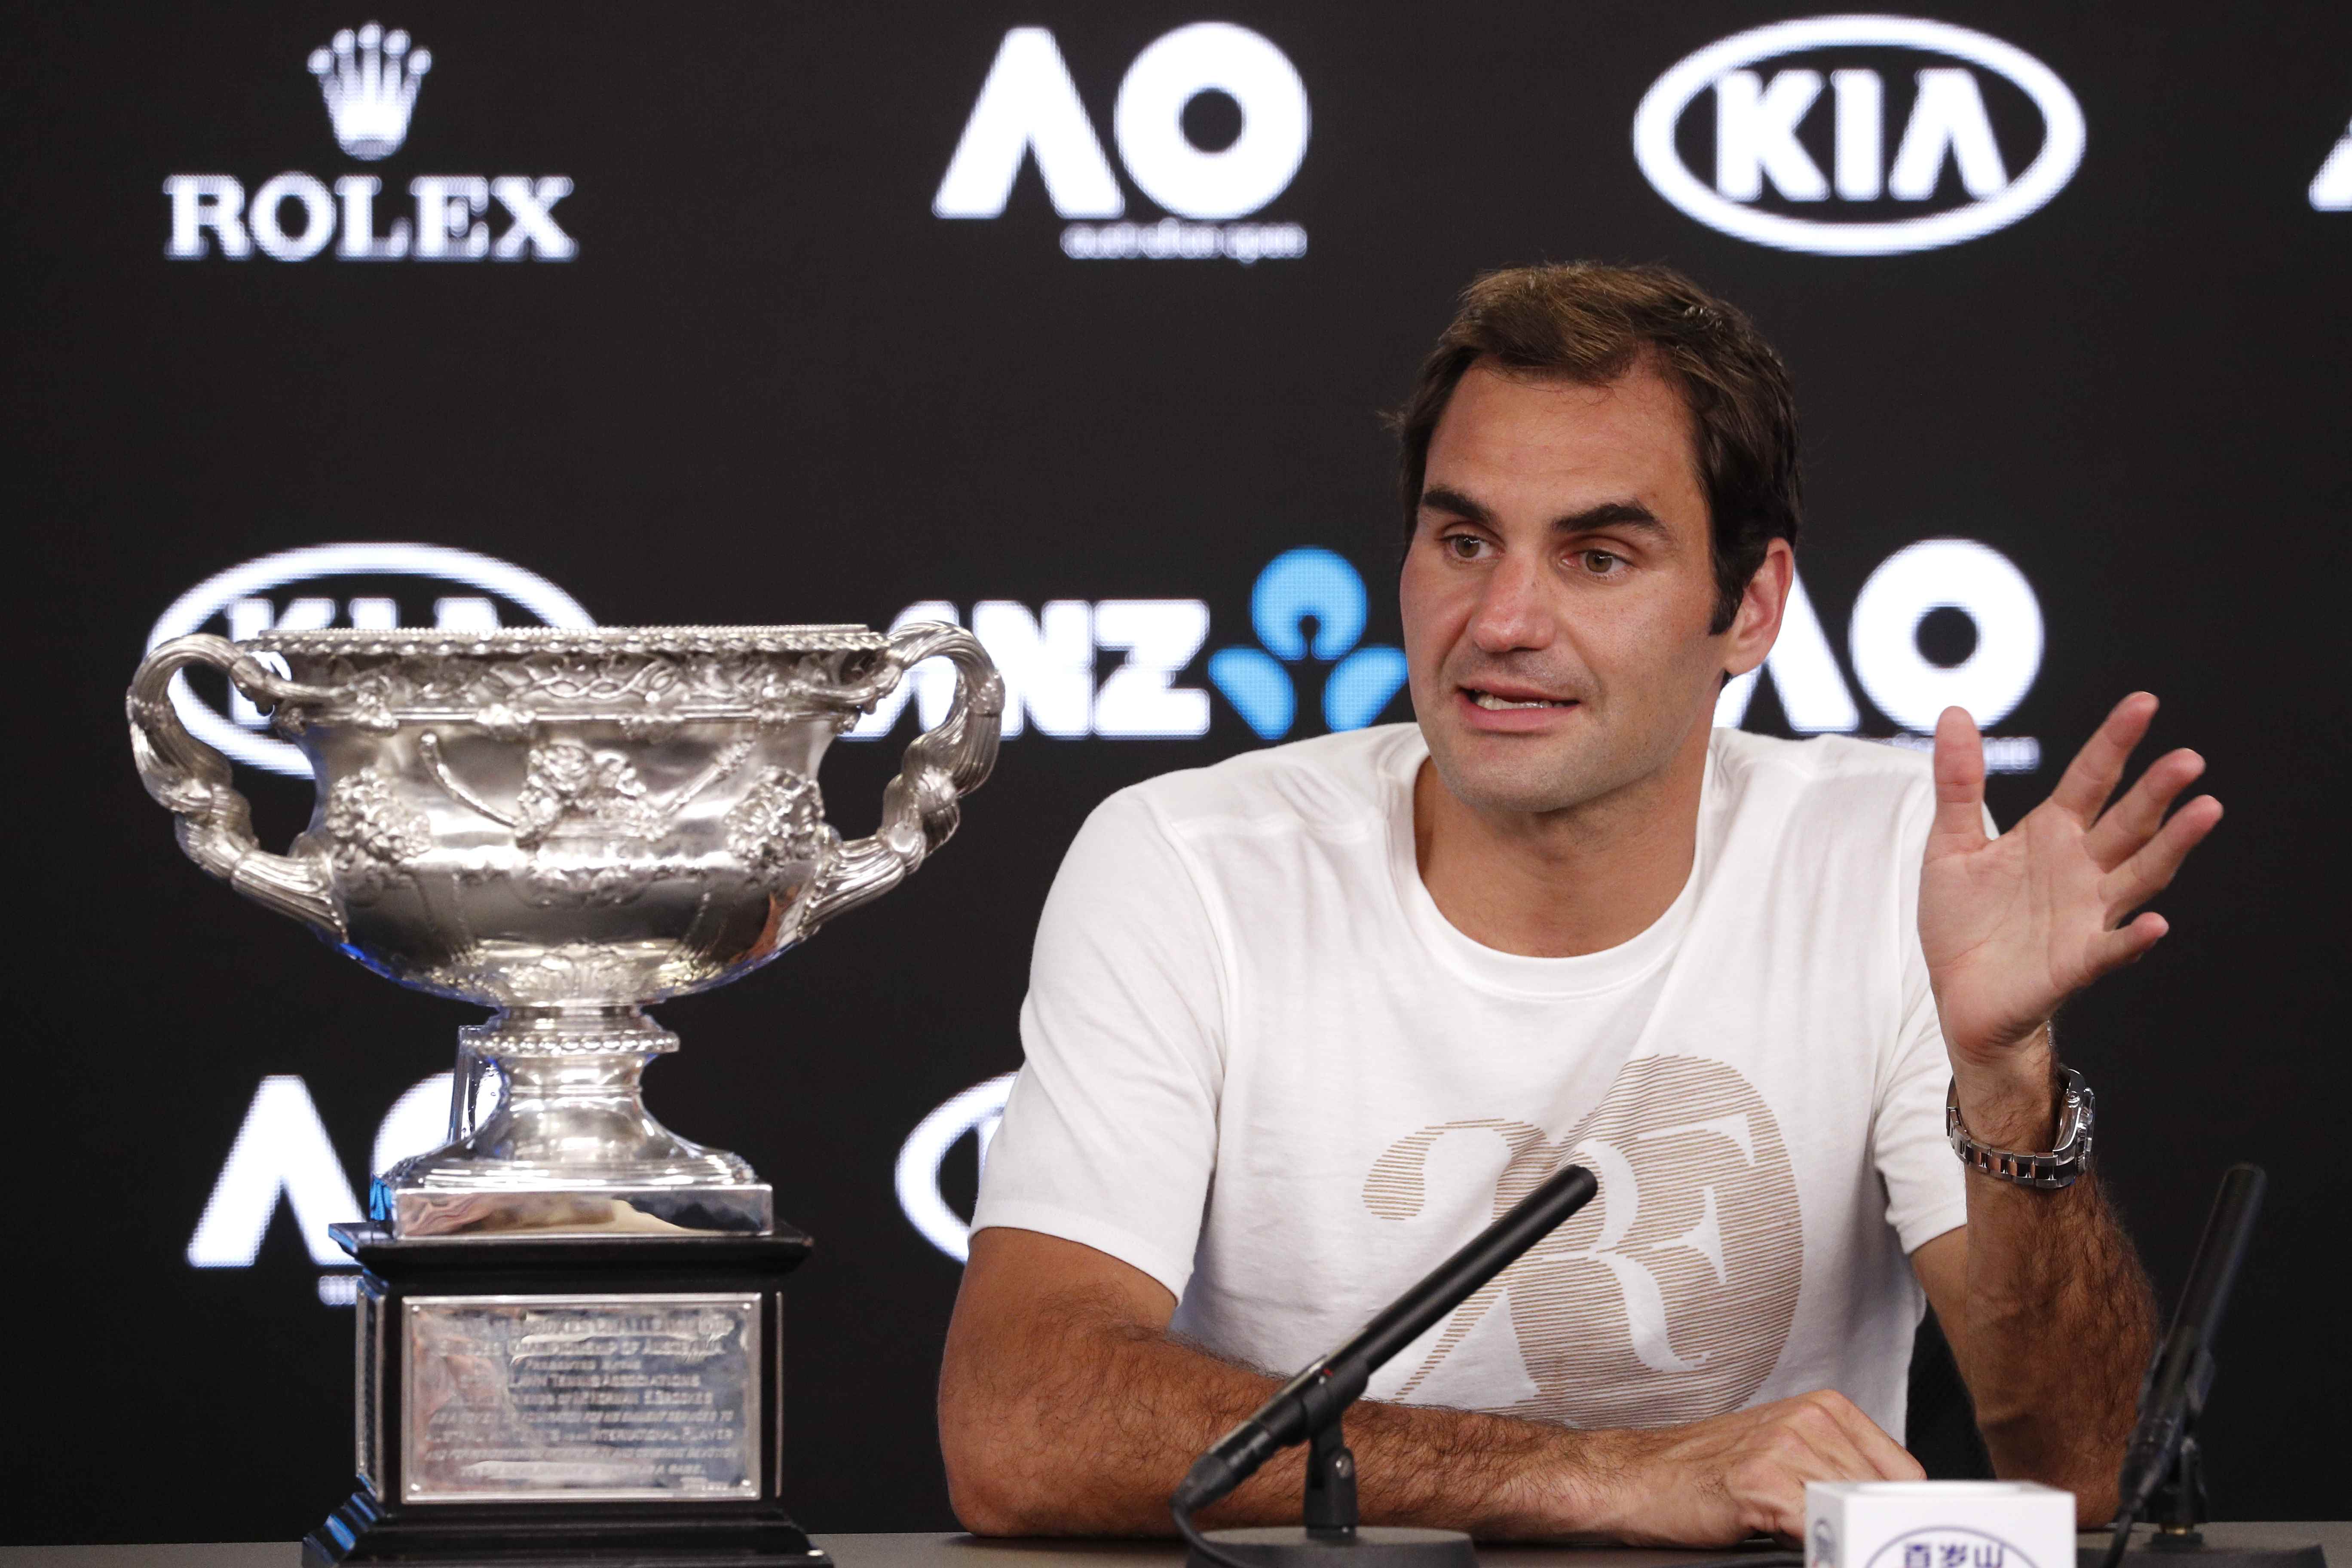 Tennis: Federer thrilled as 'fairytale continues'